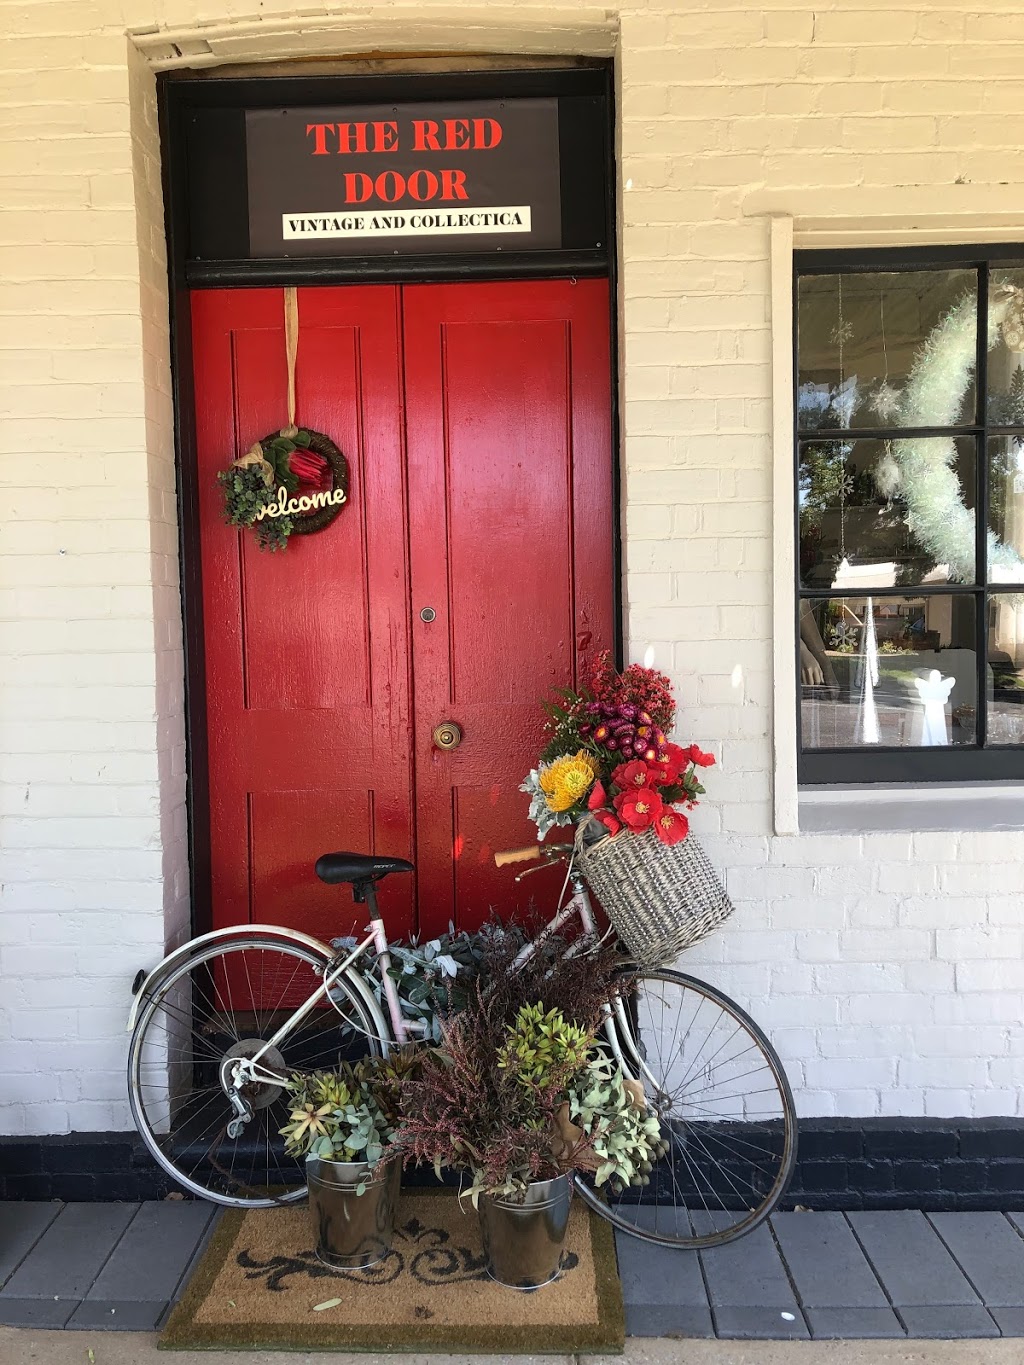 The Red Door Vintage and Collectica | store | 31 Gidley St, Molong NSW 2866, Australia | 0407623393 OR +61 407 623 393